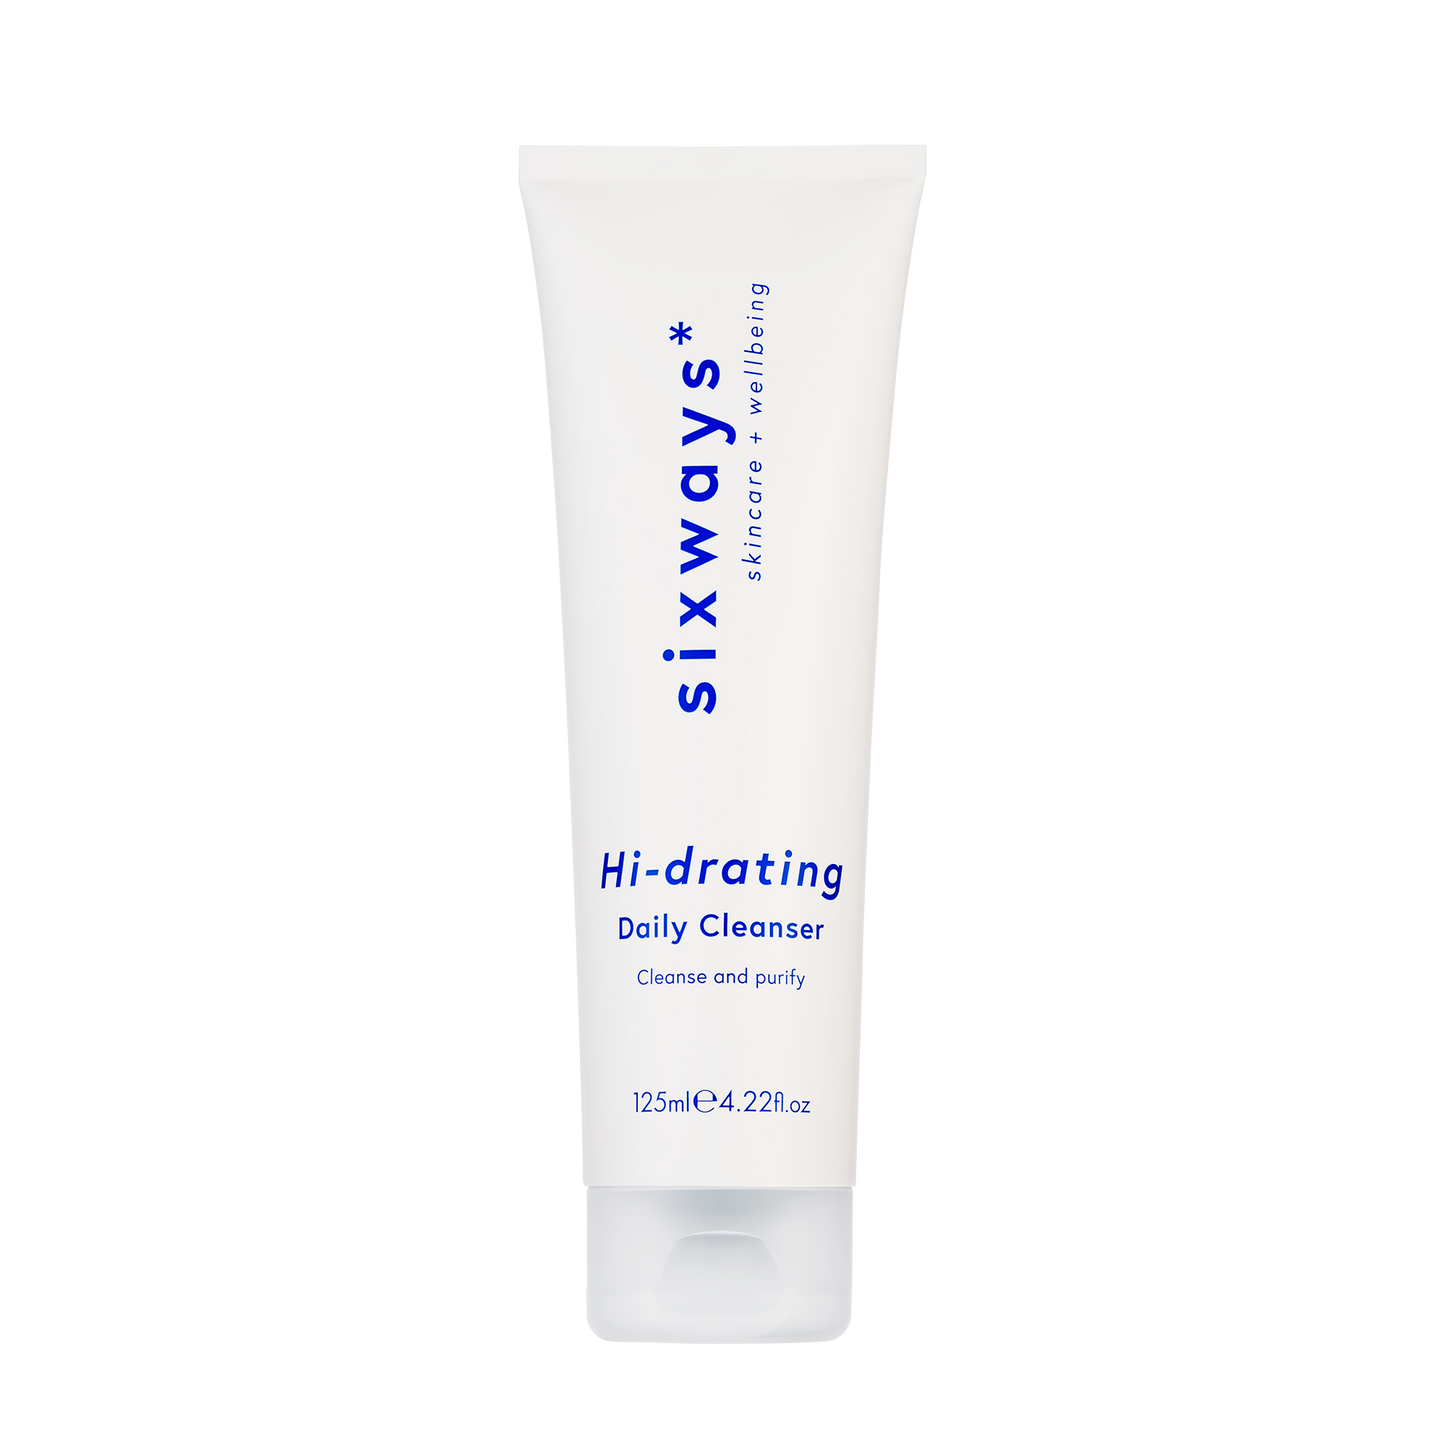 Hi-drating Daily Cleanser